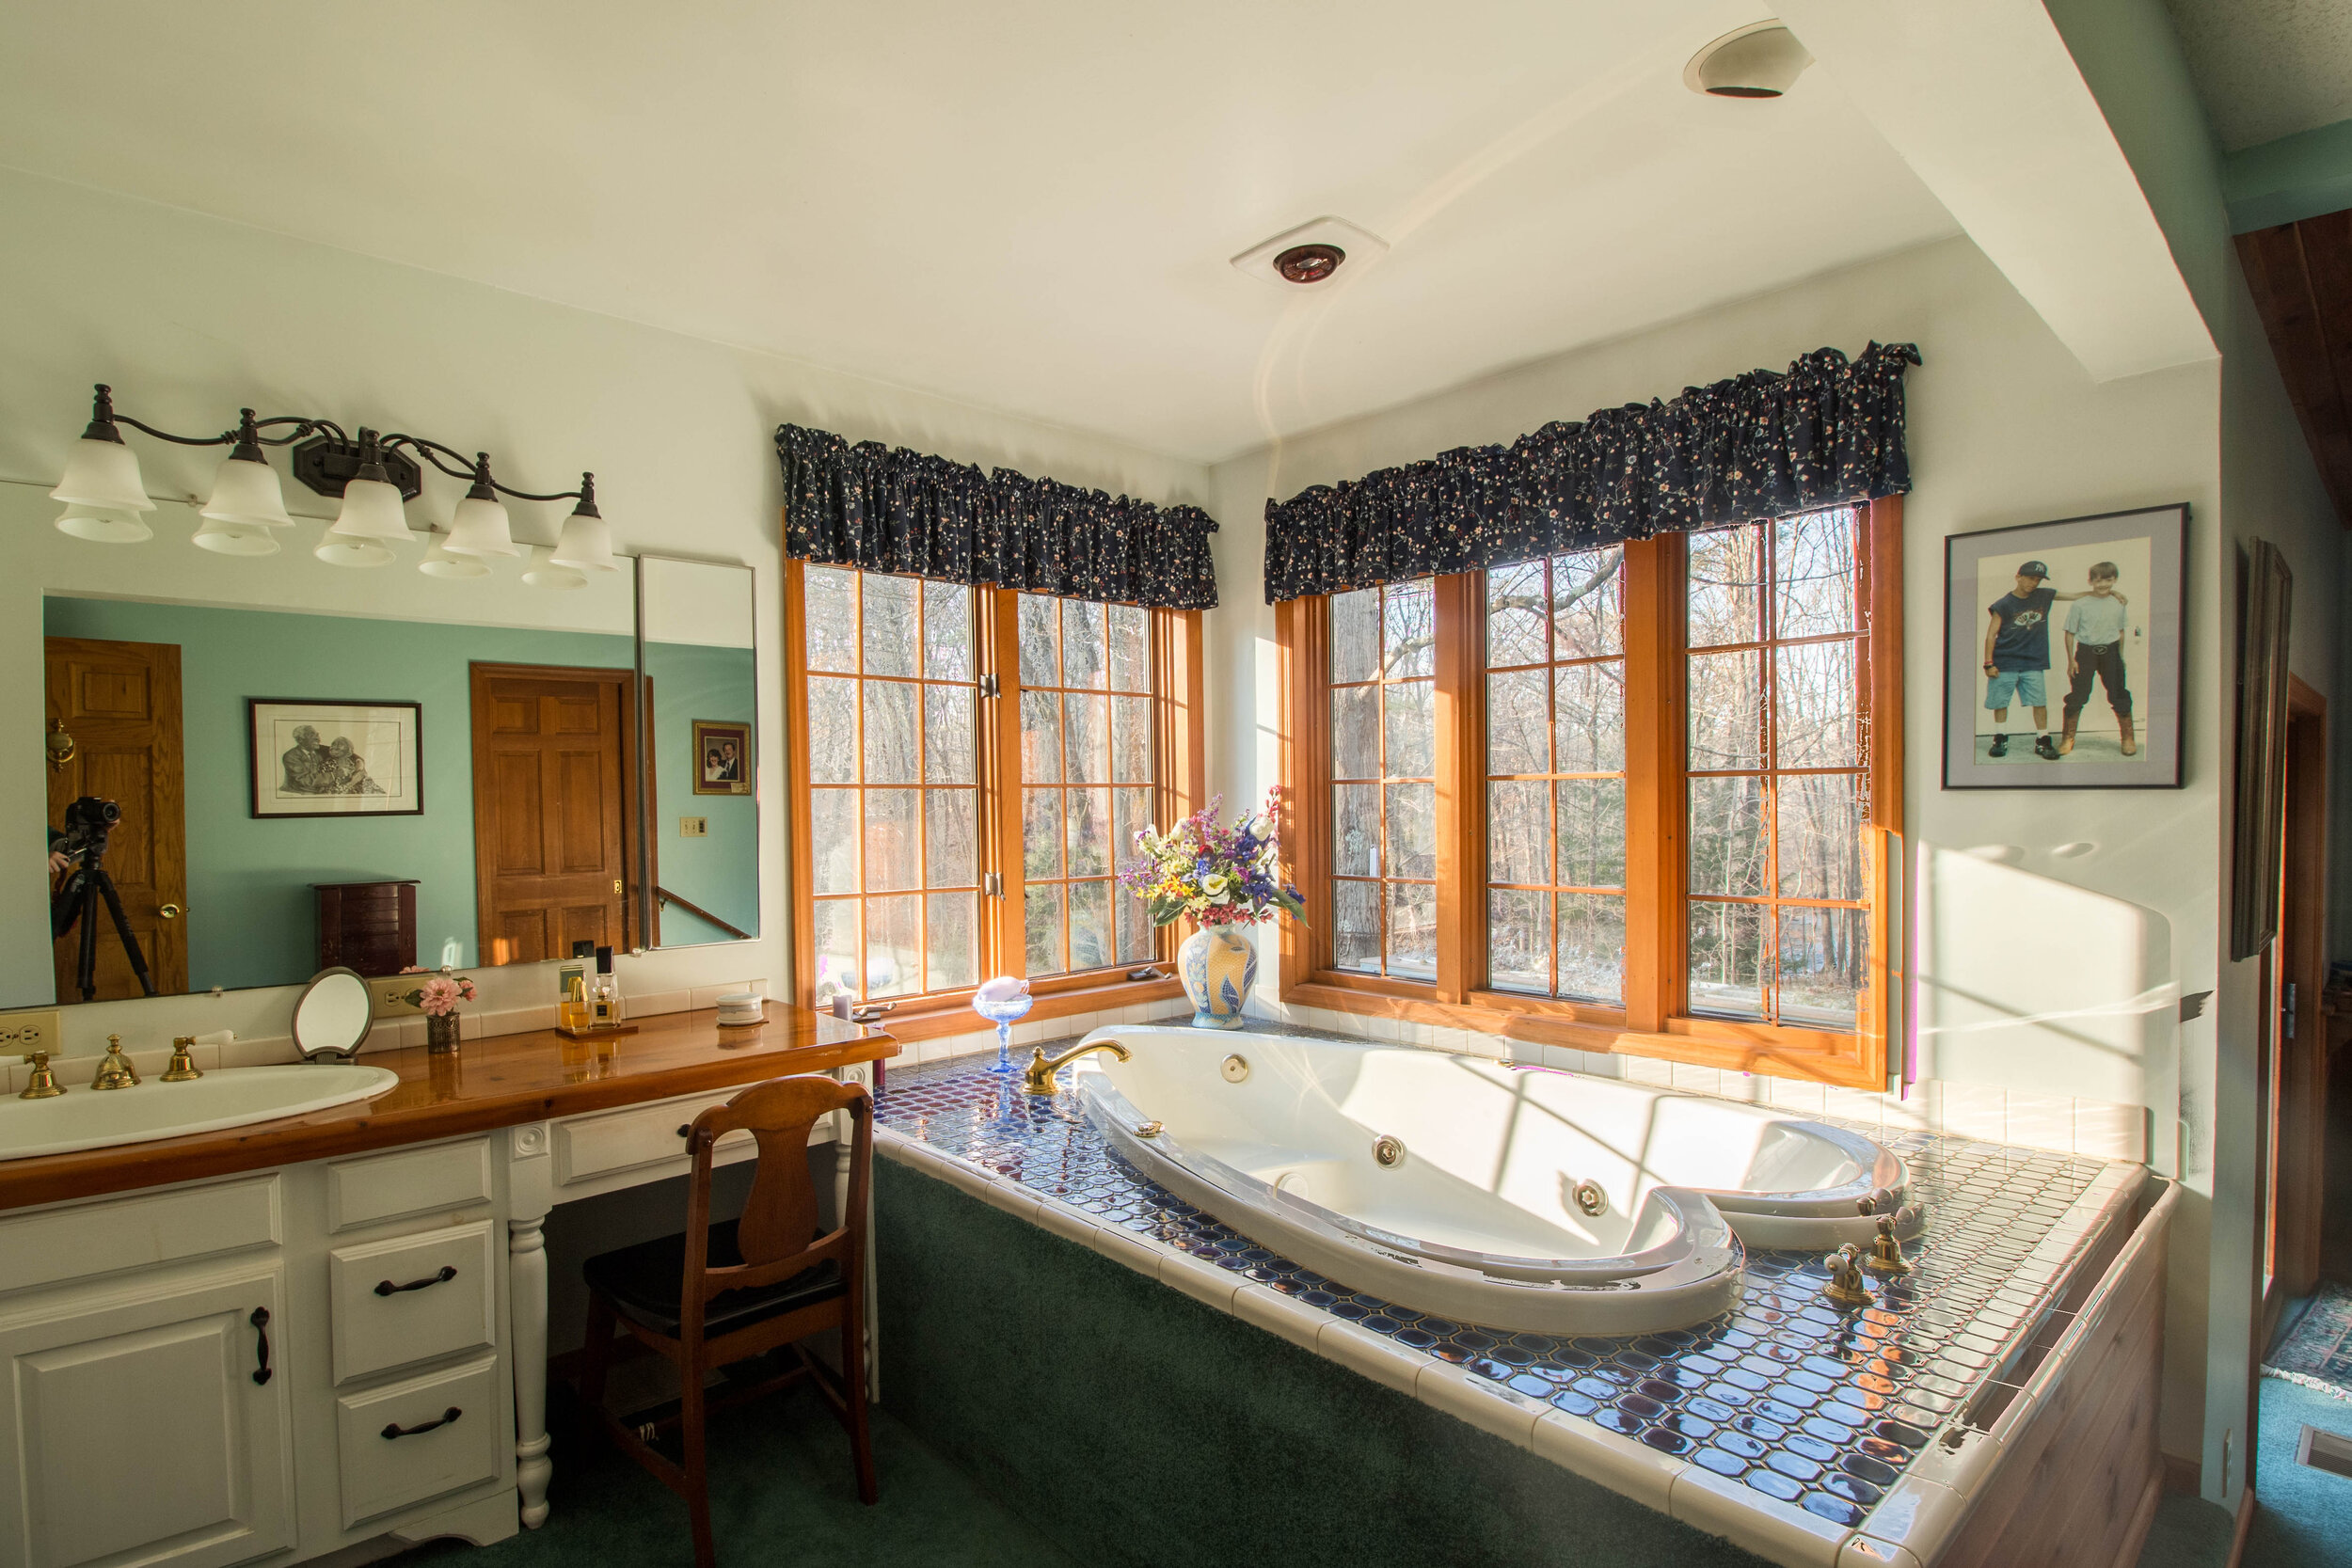  Bathroom with jacuzzi type tub.  Large white vanity with wood top runs alongside the back wall. Rectangle mirror above the vanity/sink combo and a set of 5 windows surround the tub. 